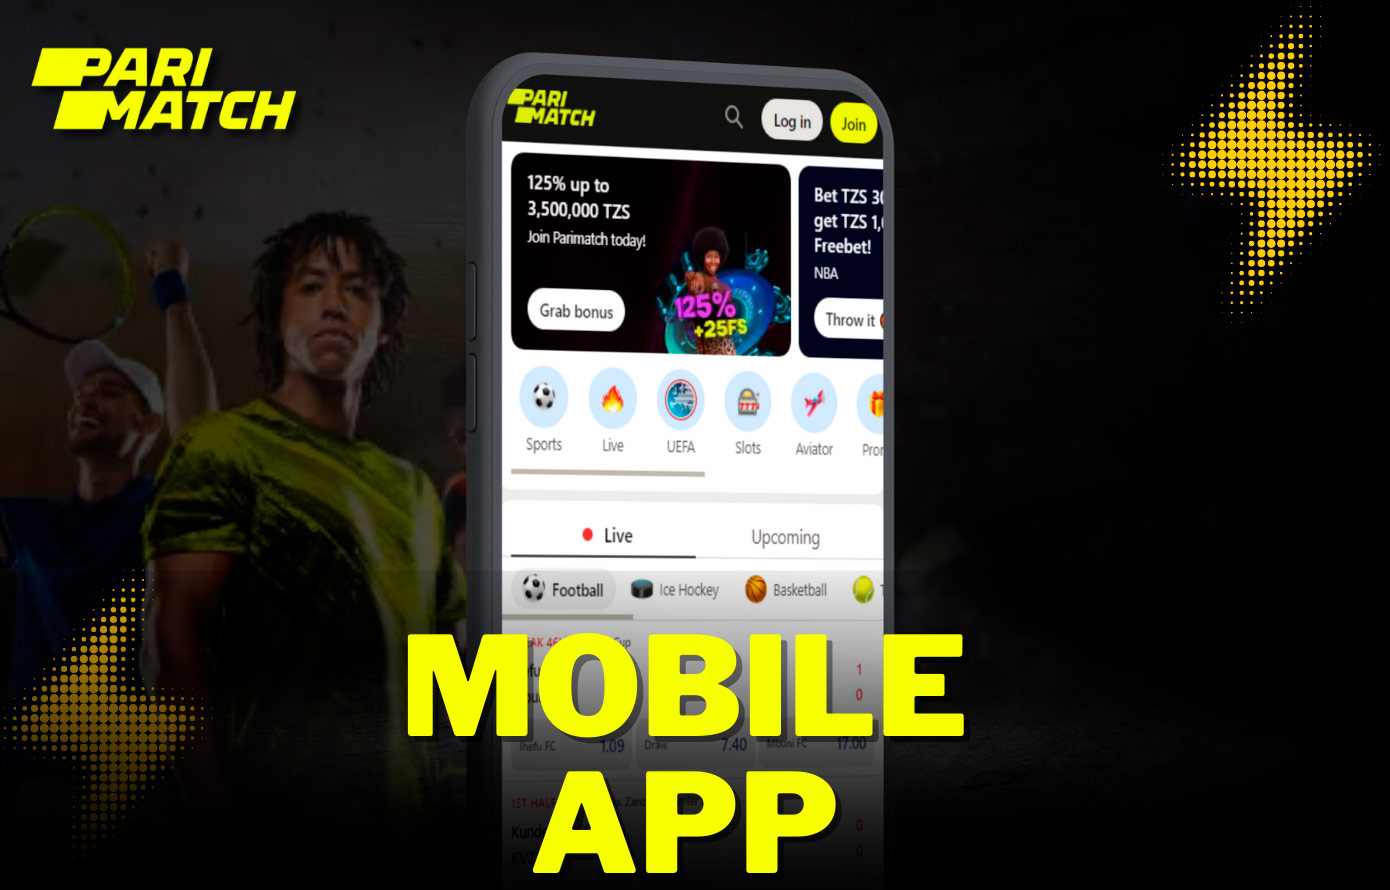 Get the Parimatch Mobile App for free and enjoy seamless